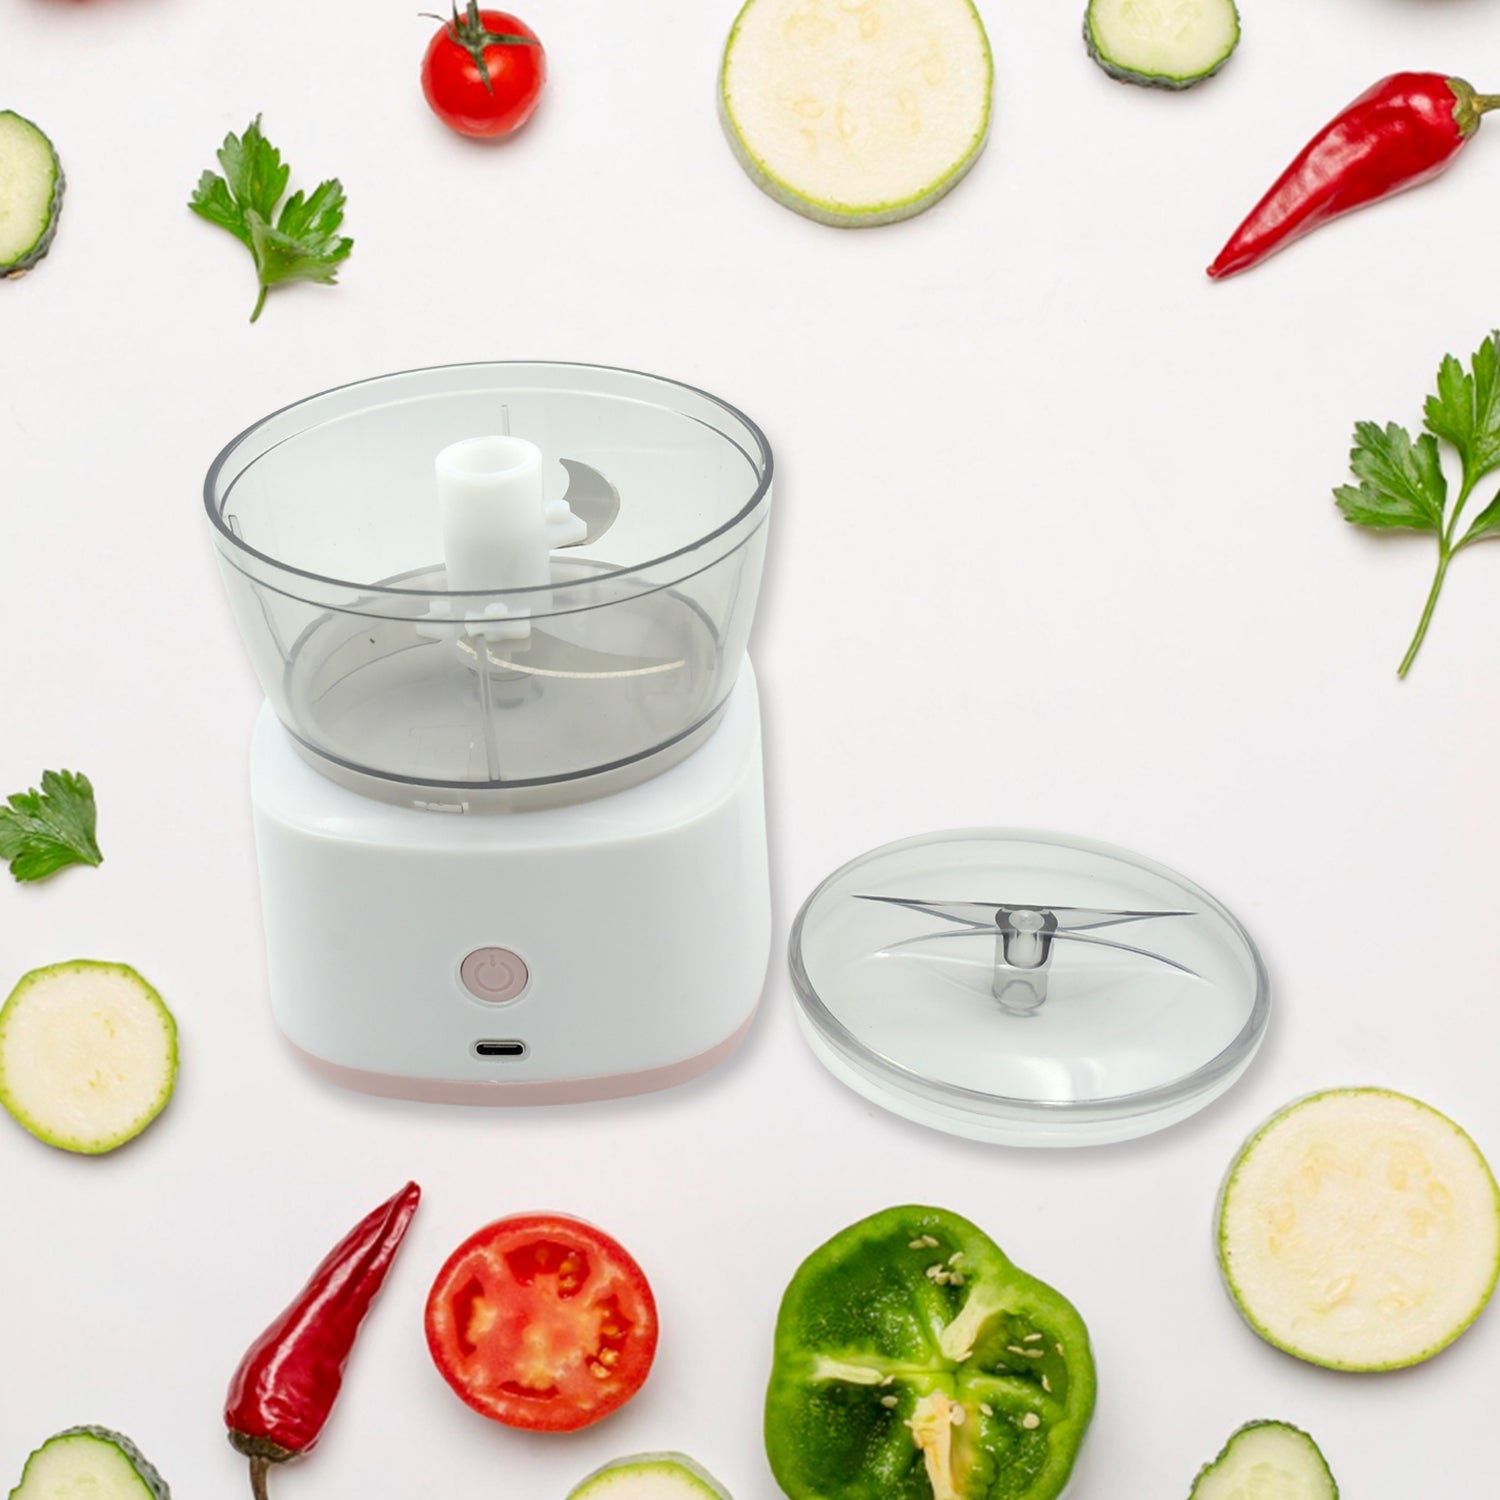 5769 Portable Mini Food Processor Chopper Electric Veggie Chopper 3 Blades With Charching Cable Type C, Vegetable Chopper, Garlic Chopper Food Grinder for Chopping Ginger, Pepper Chili, Onion, Fruit, Meat